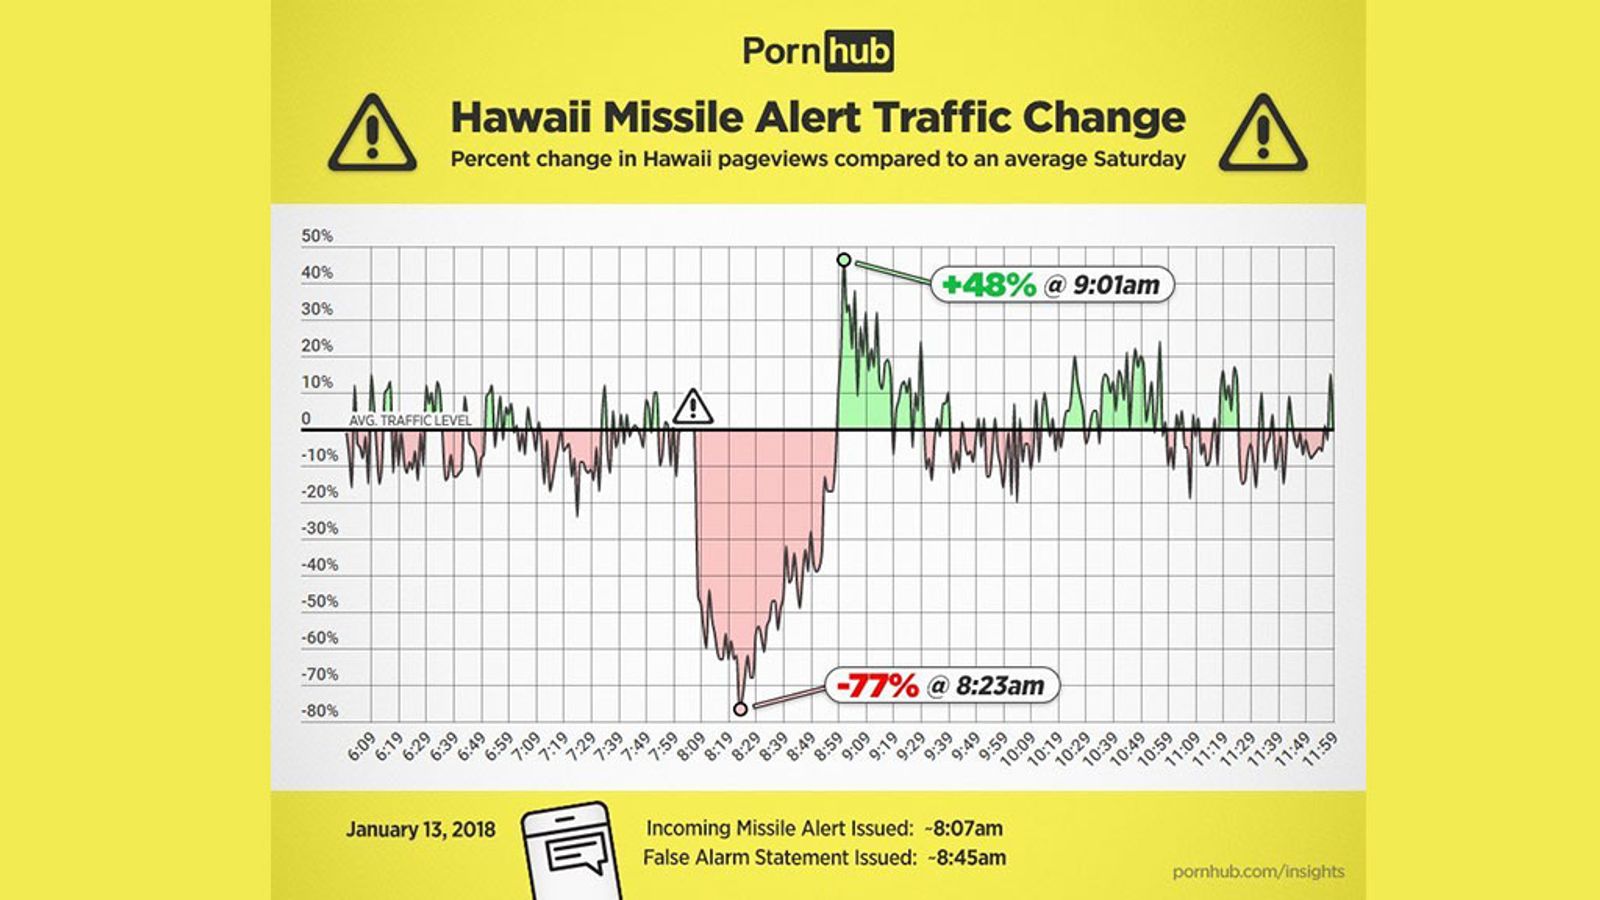 Fake Nuke Alert In Hawaii Leads To Spike In Porn Viewing